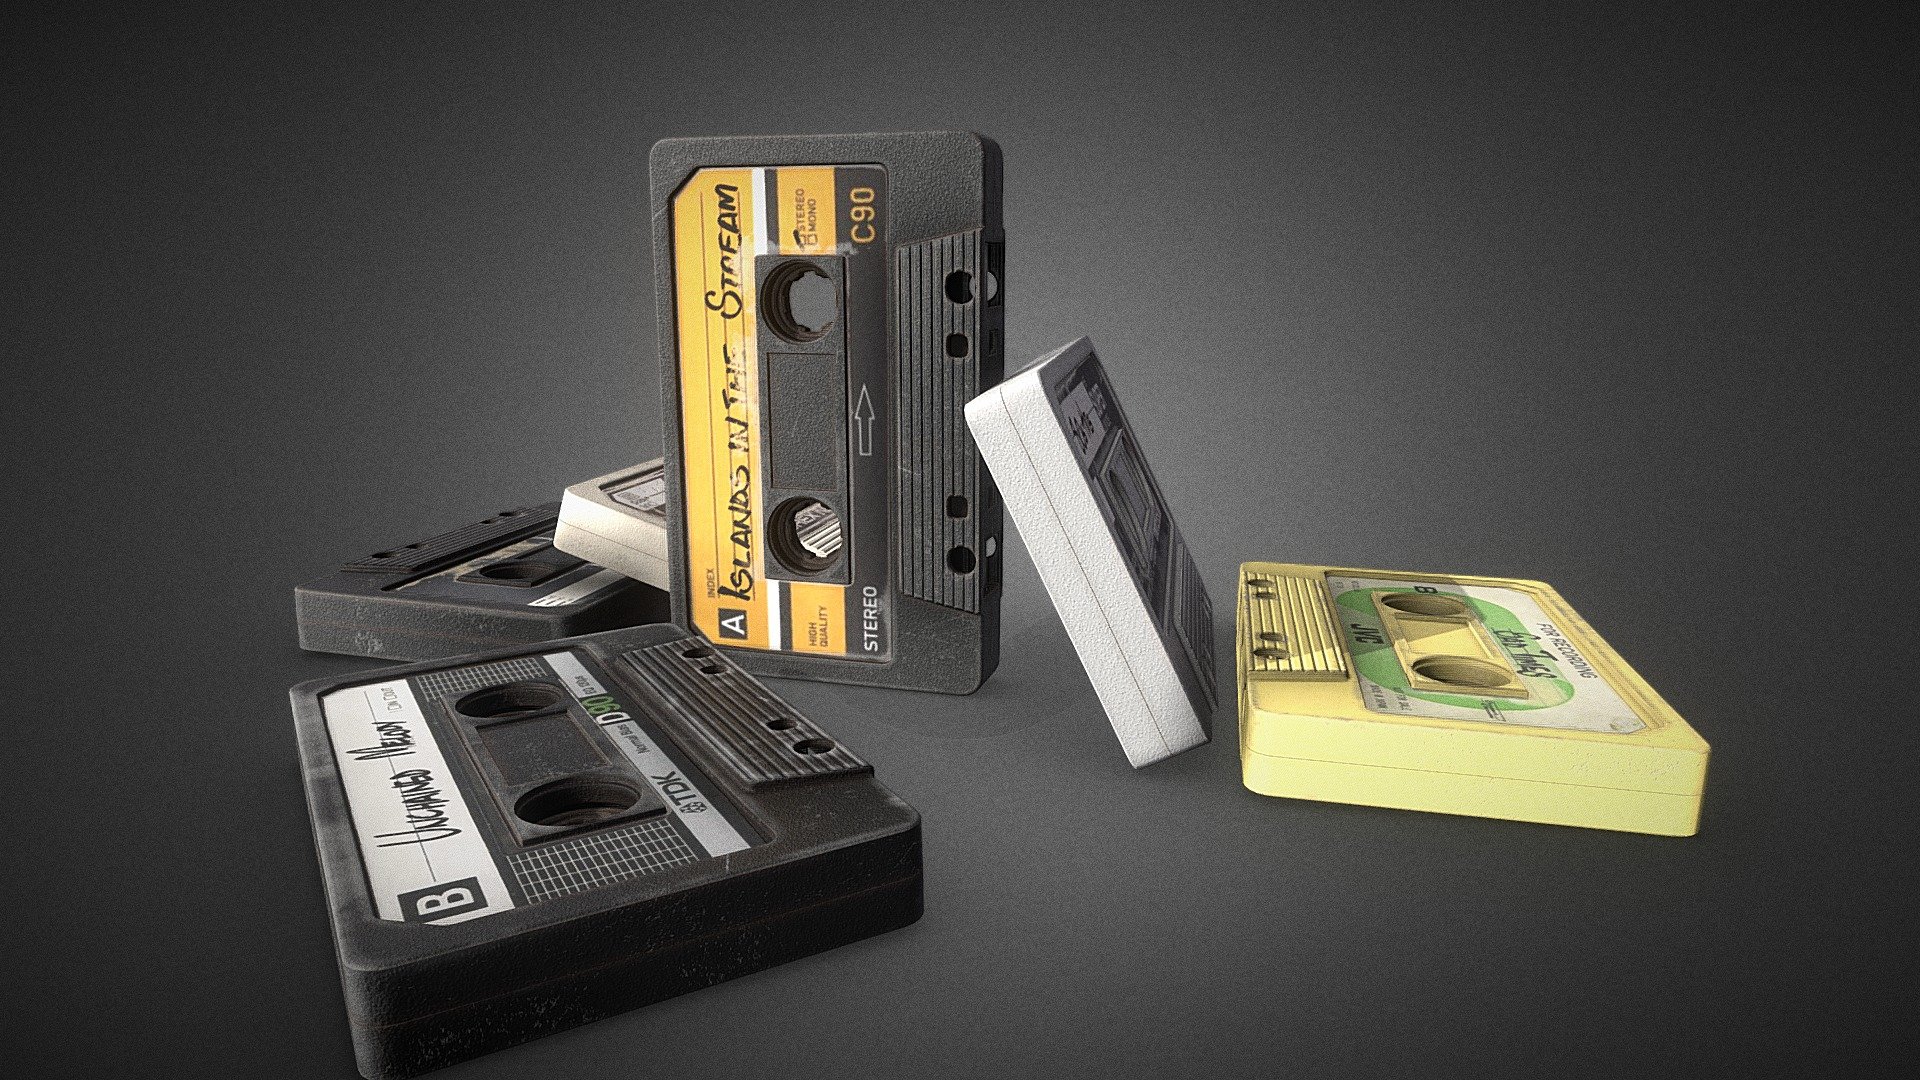 A set of 6 old Cassette tapes; modelled in Blender and textured in Substance Painter. Each model utilizes 1UV set with 2k textures with 8 bit maps and 16bit normal map; I varied the colours, labels and the design slightly for purposes of preference and variaty for anyone who may want to use any of them. The cassettes were textured having an old, worn and dusty kind of feel and story to it 3d model